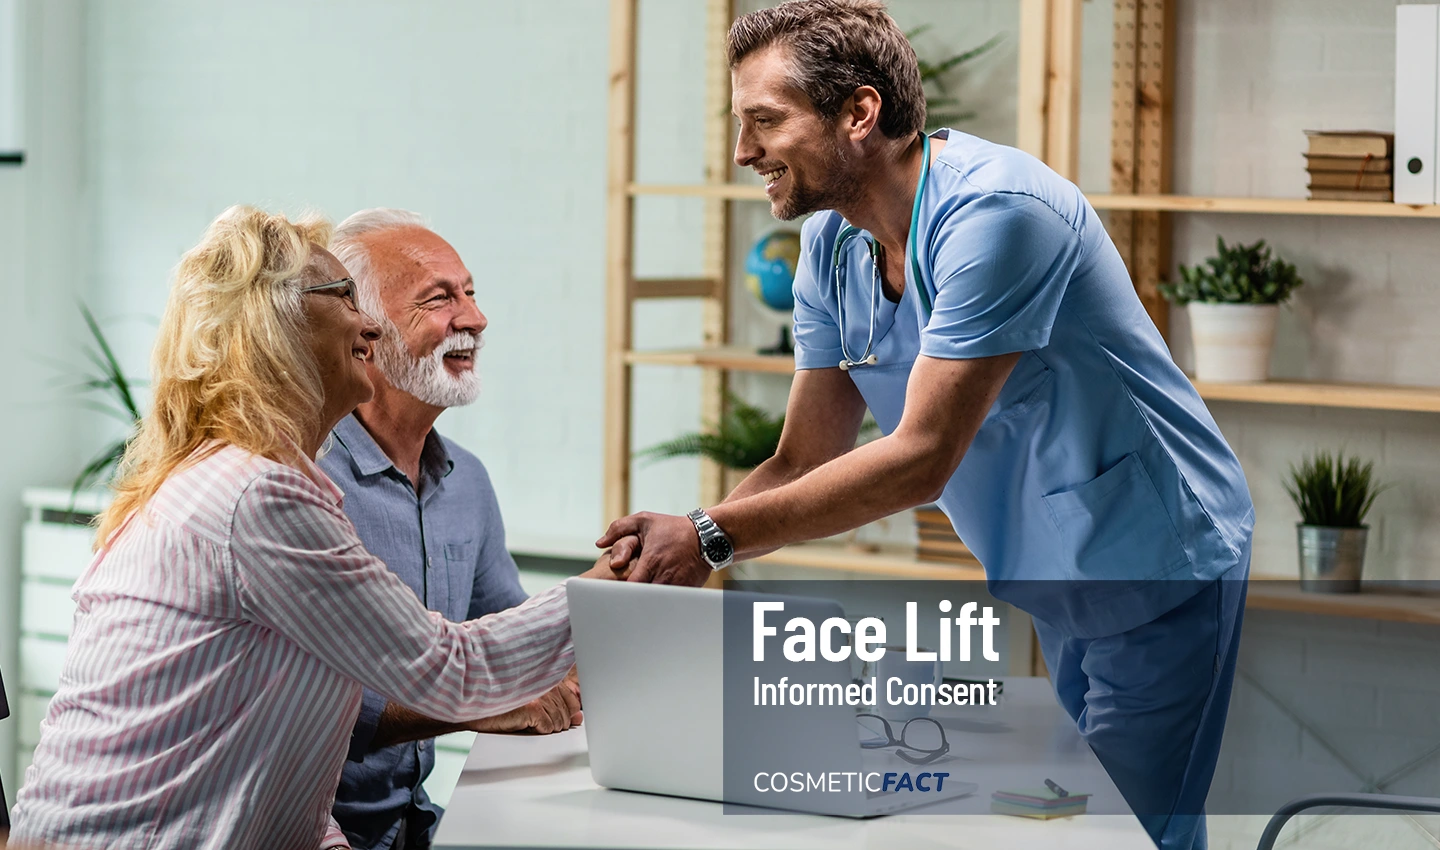 An elderly couple shakes hands with their facelift surgeon, signifying their satisfaction with the informed consent process and their successful surgery.